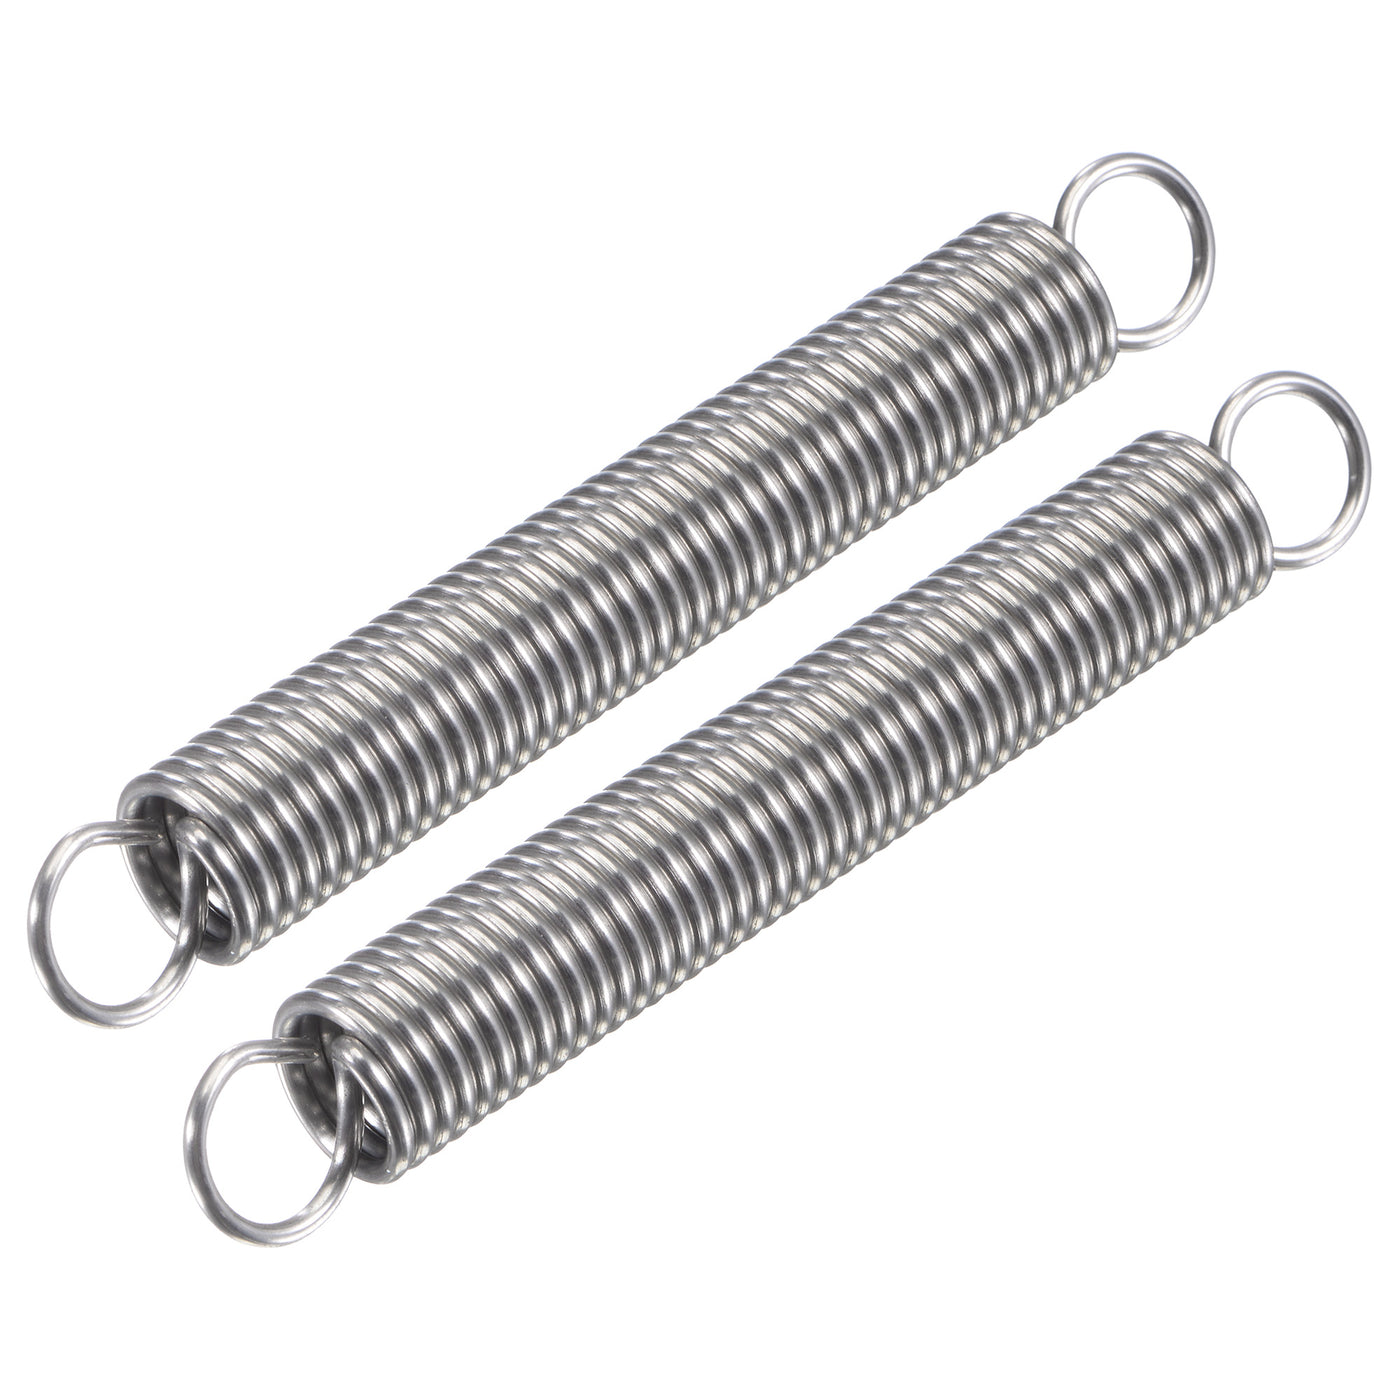 Uxcell Uxcell 1.5mmx12mmx60mm Extended Compression Spring,8.6Lbs Load Capacity,Silver,2pcs